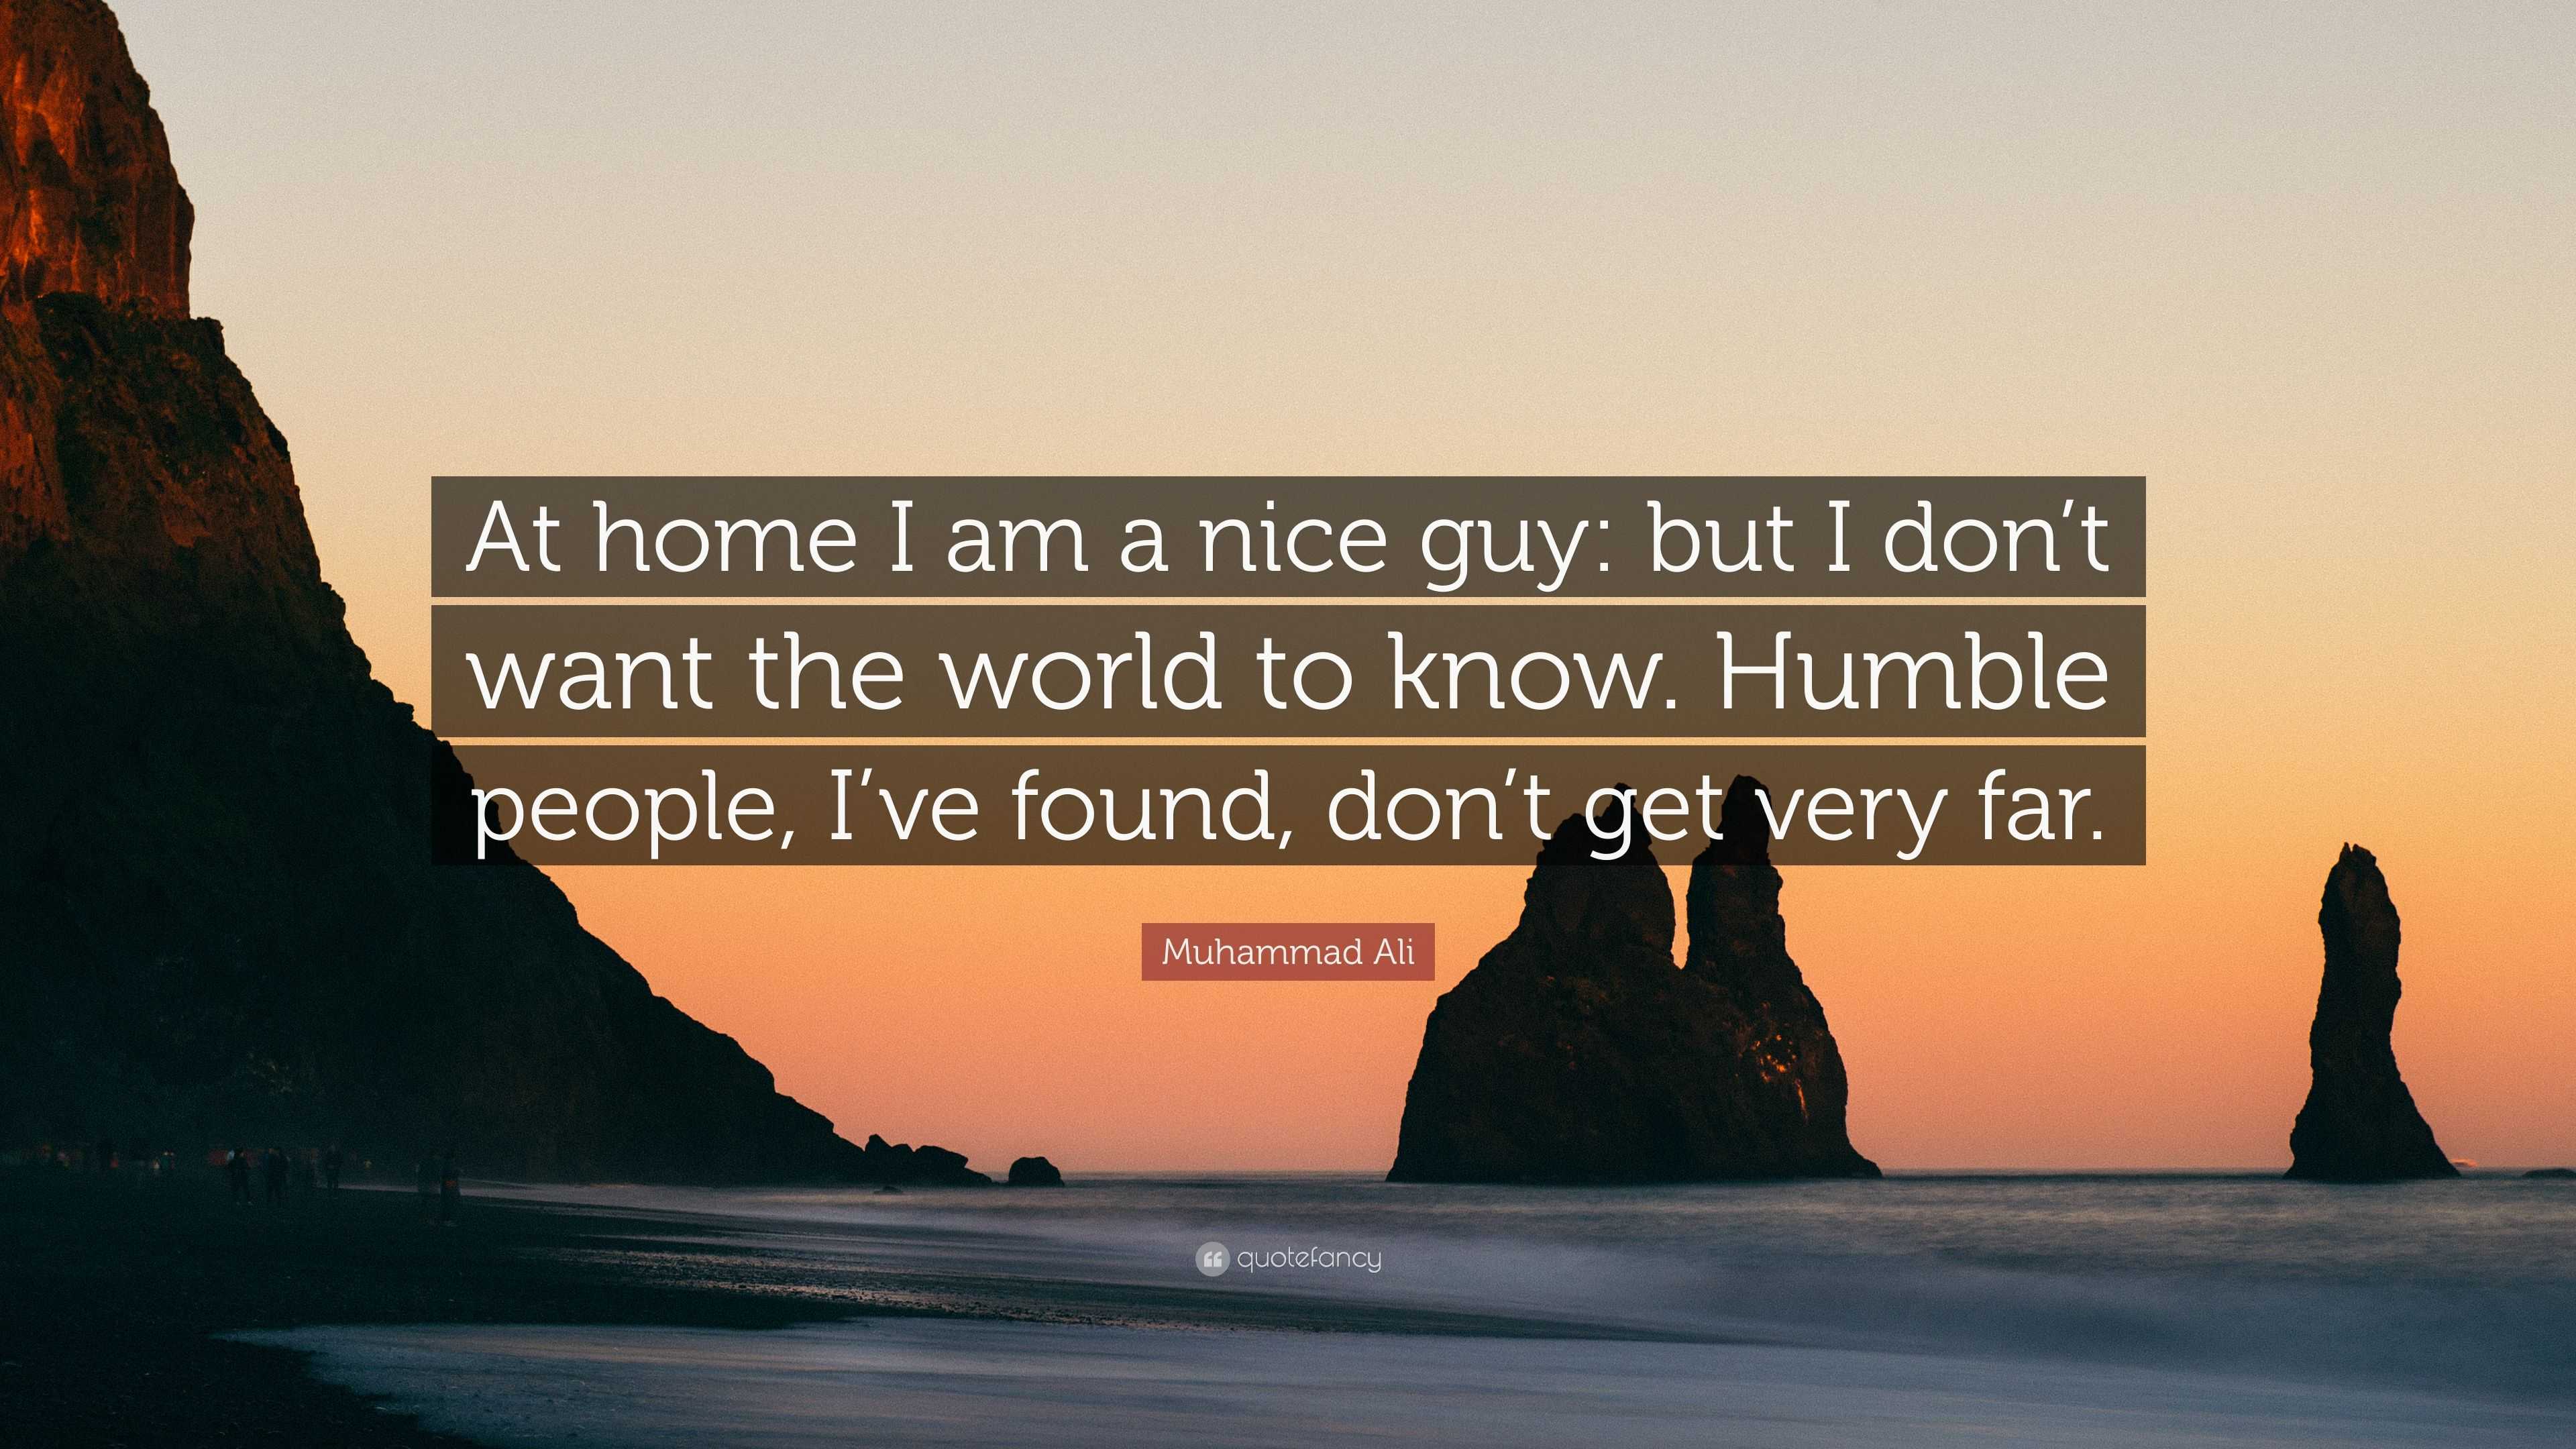 Muhammad Ali Quote: “At home I am a nice guy: but I don't want the